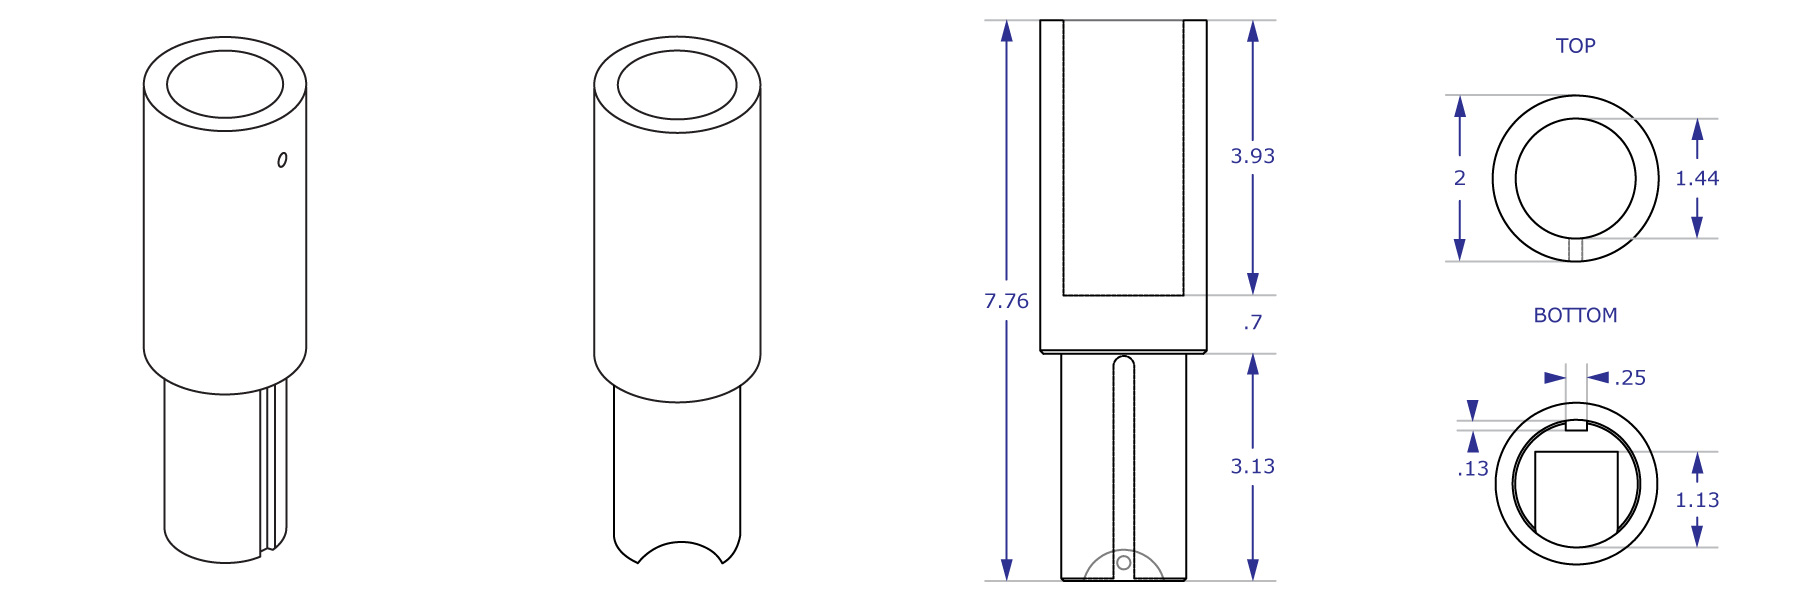 MKIT-Y pole top mount specification drawings of sides, top and bottom views with measurements